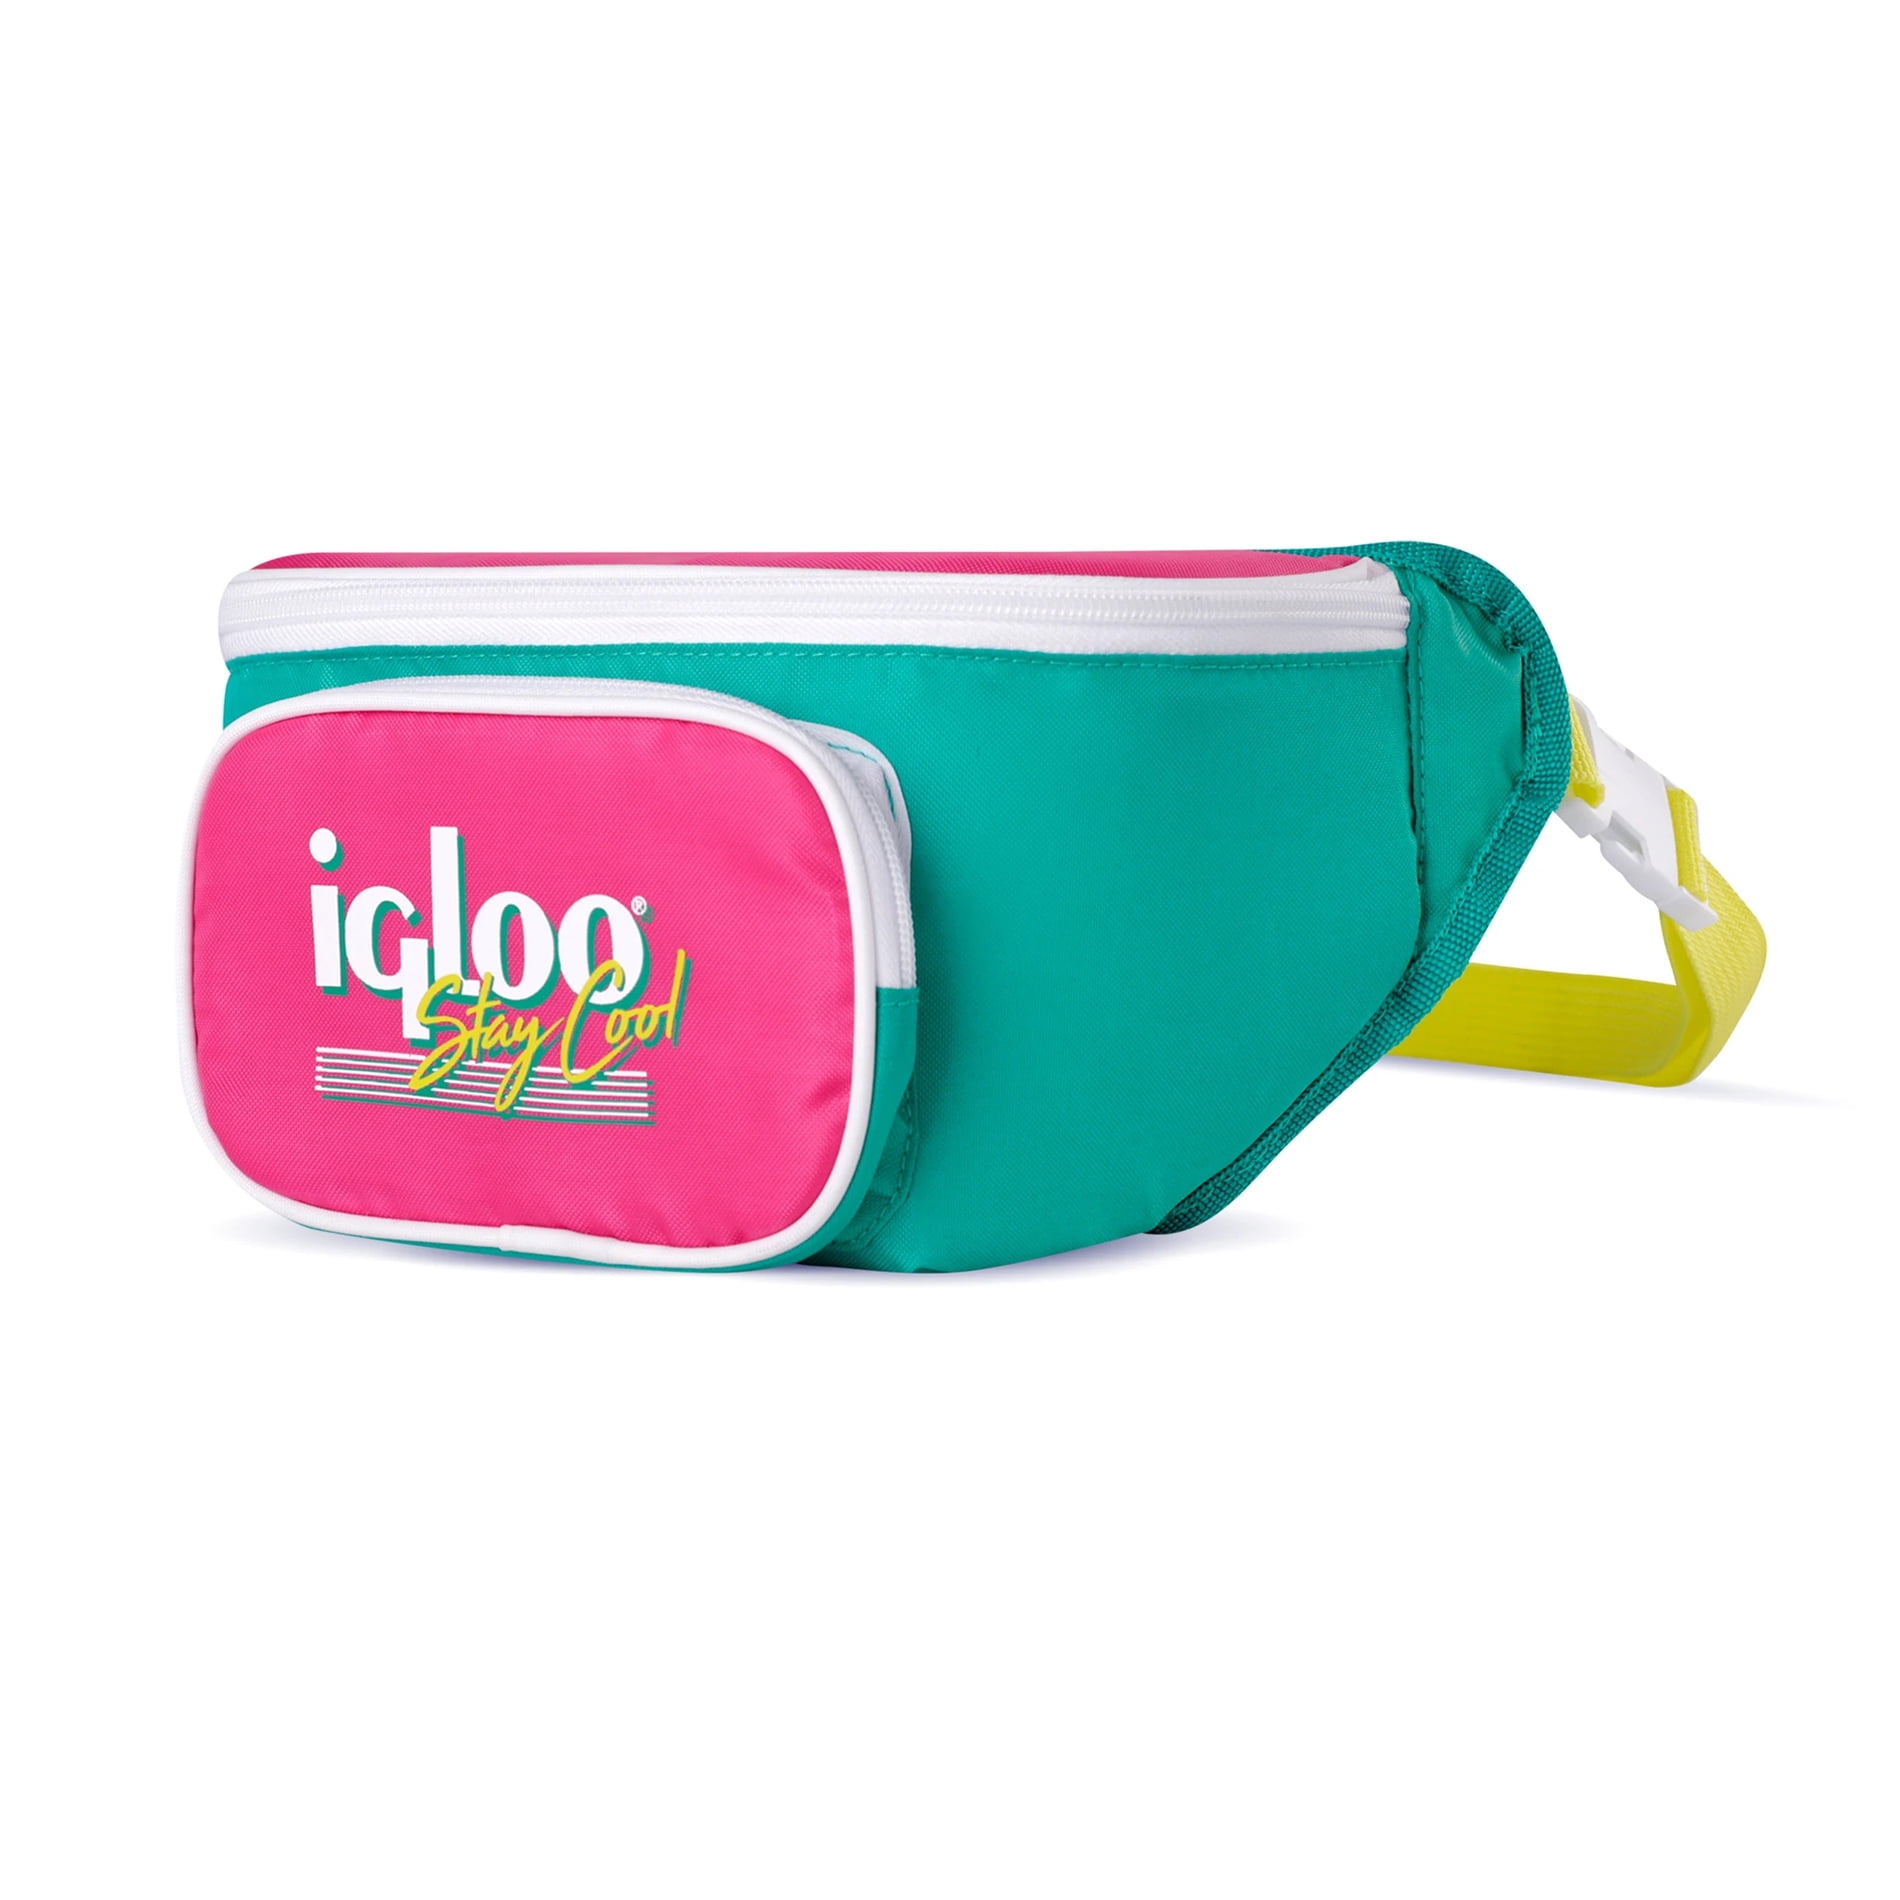 Igloo 00065477 90s Collection Fanny Pack Cooler, Green and Pink - Walmart.com